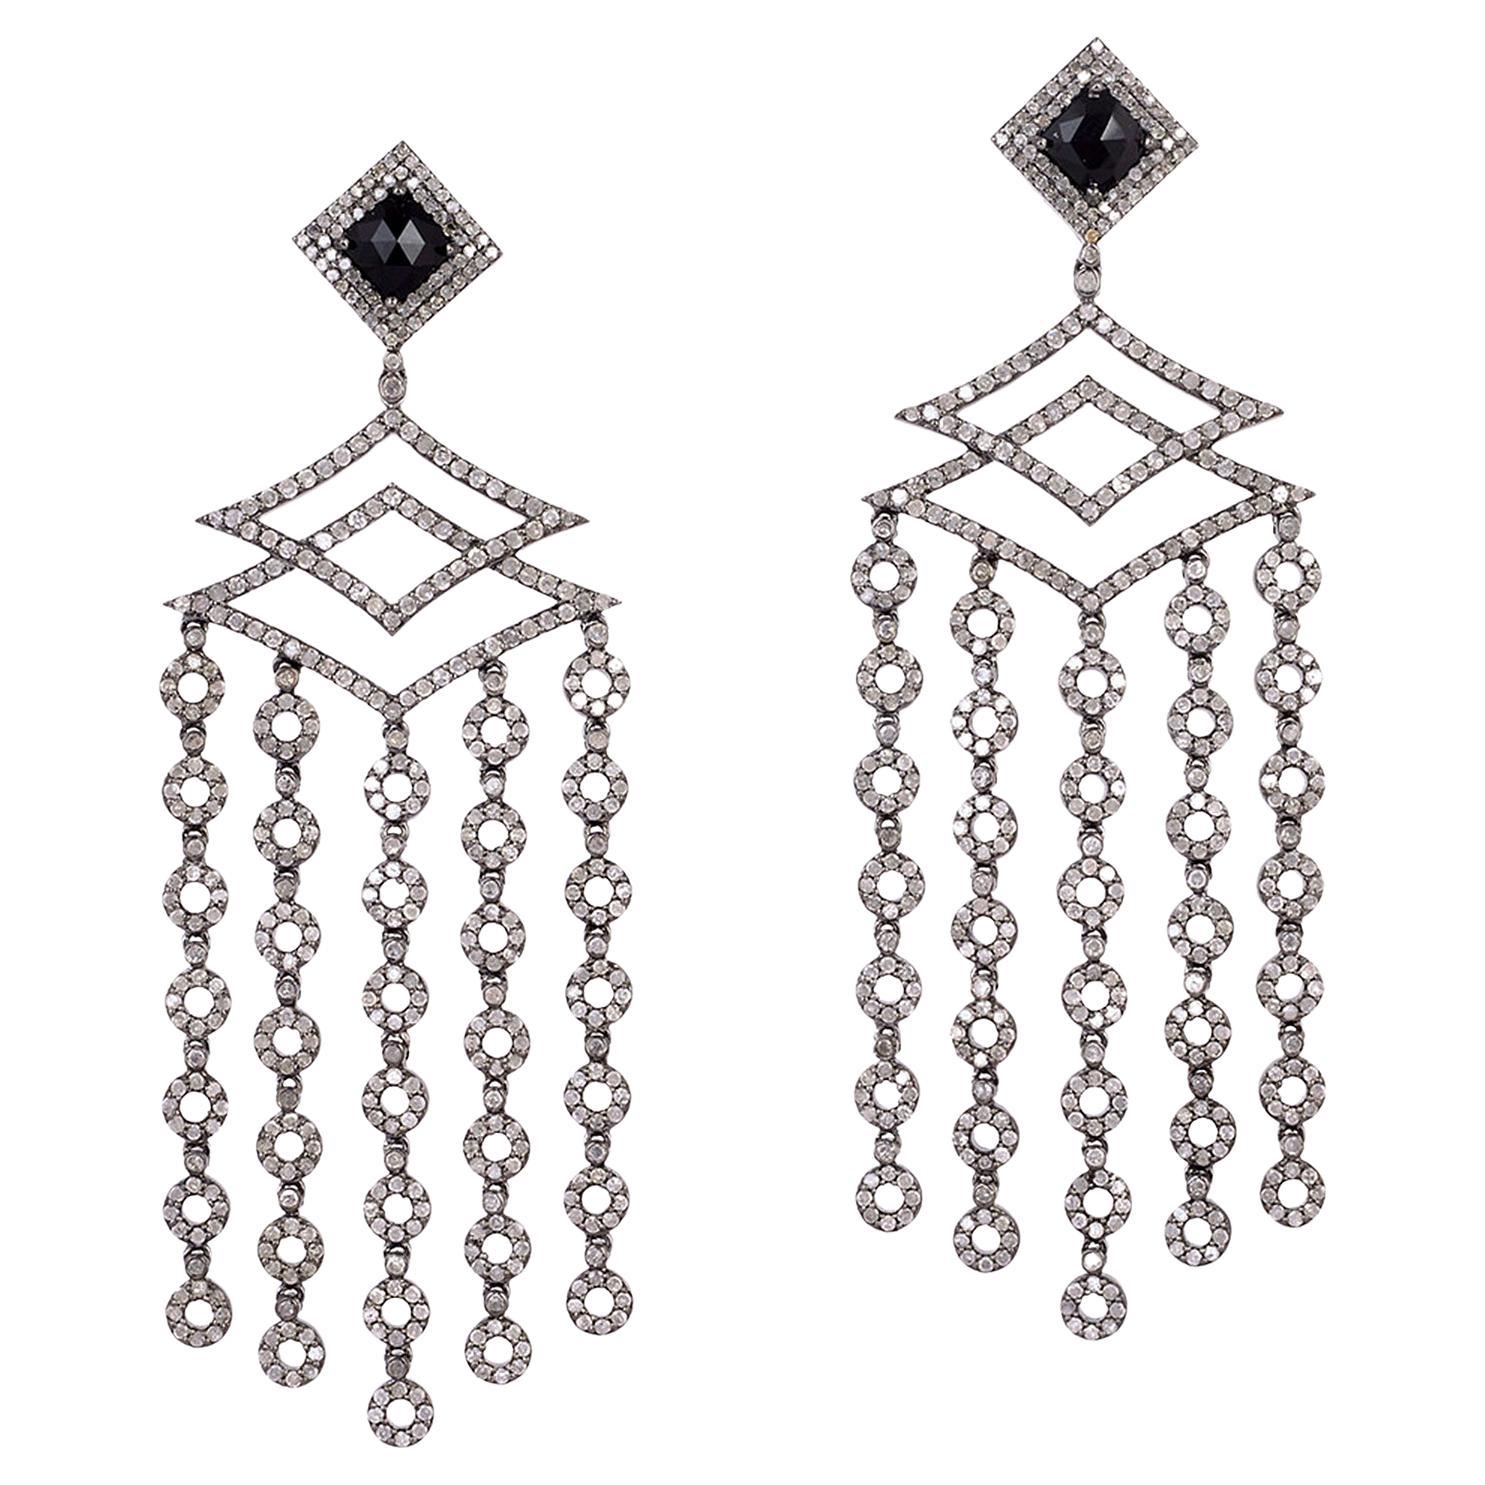 7.55ct Diamond Chandelier Earrings With Black Onyx In 18k yellow Gold & Silver For Sale